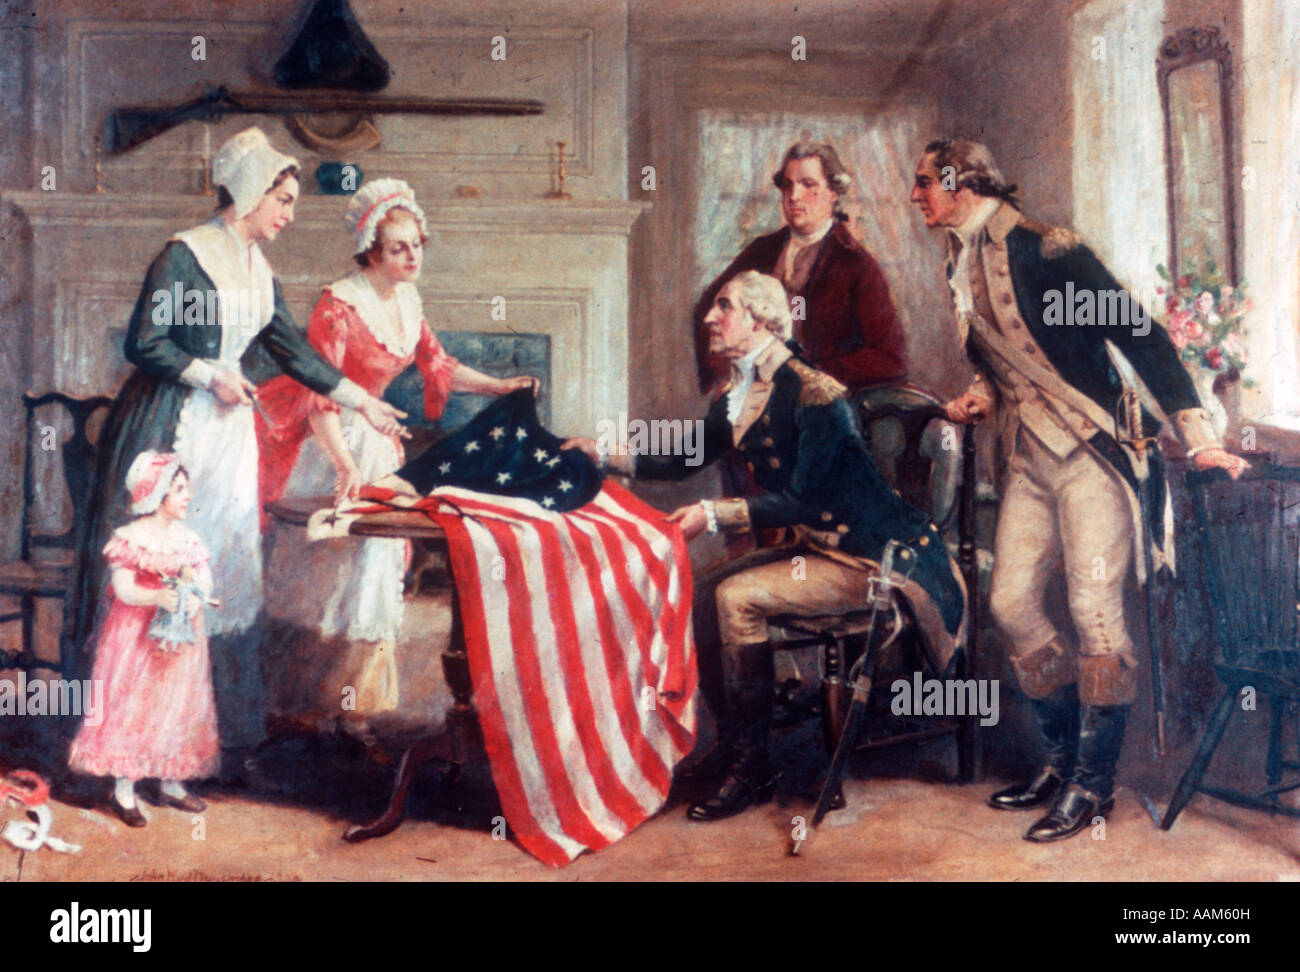 PAINTING OF BETSY ROSS & THE FIRST STARS & STRIPES 1777 BY DUNSMORE AMERICAN FLAG FLAGS REVOLUTIONARY WAR SEAMSTRESS Stock Photo